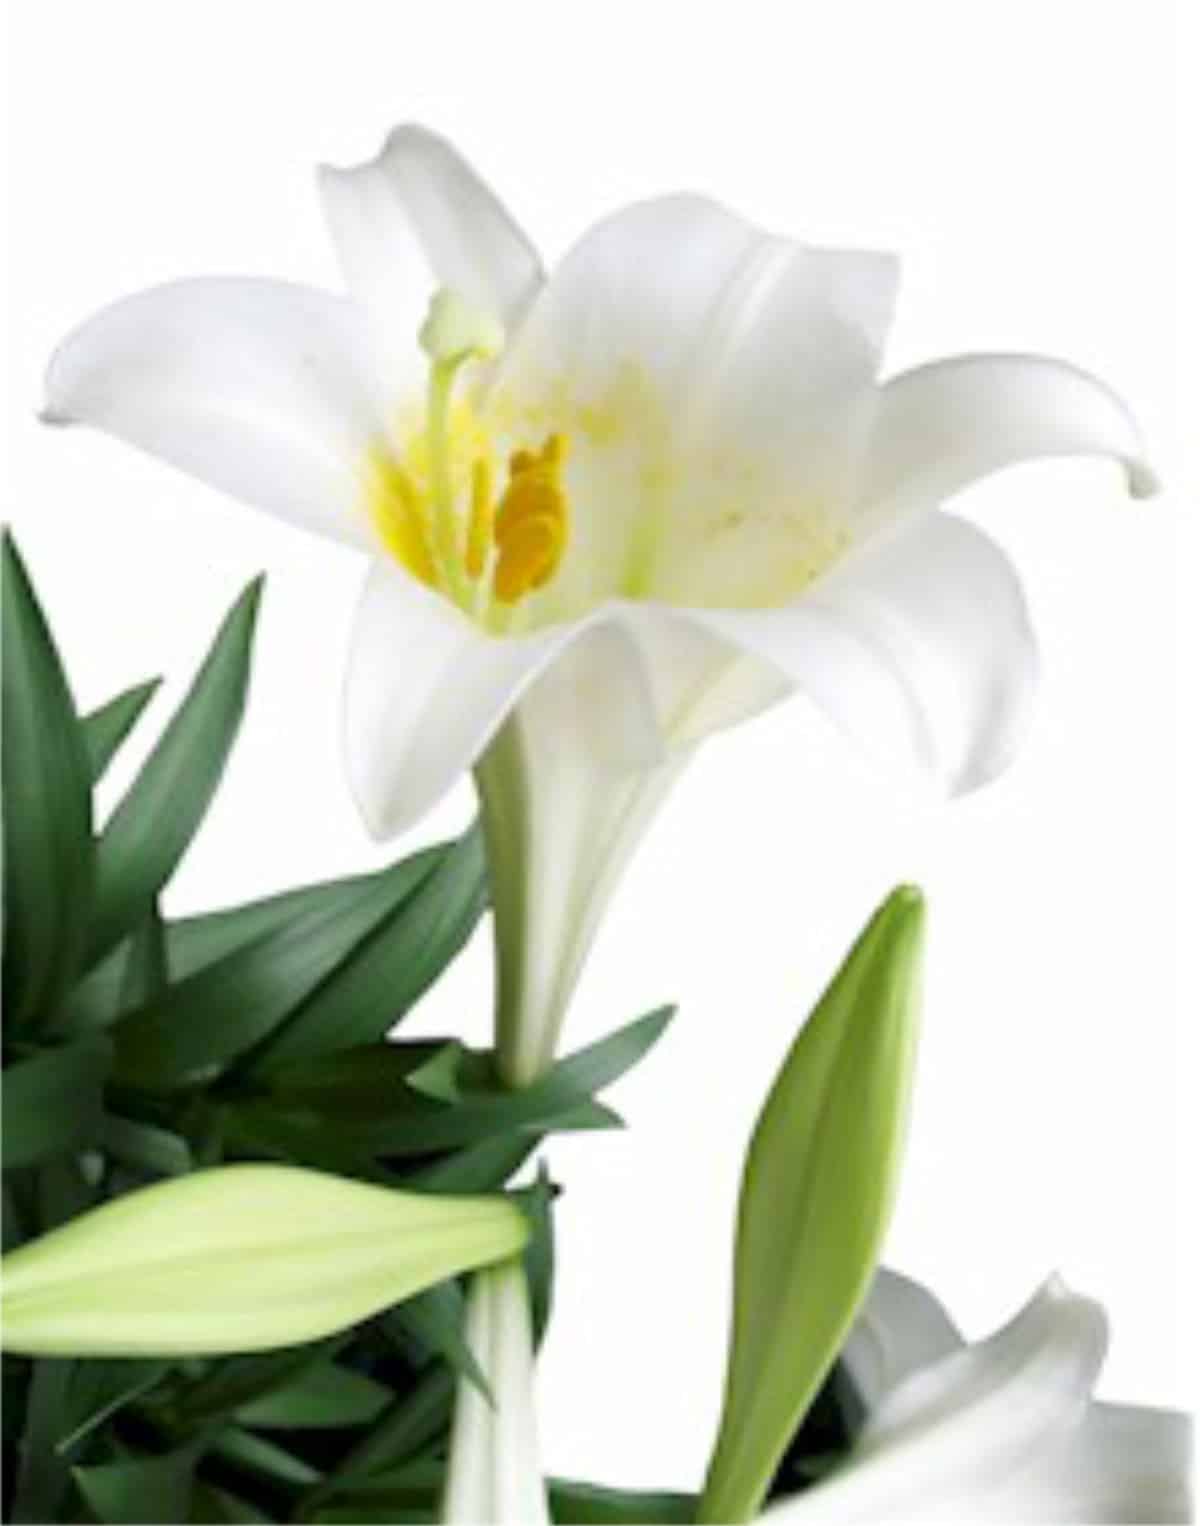 Madonna lily, symbol of Easter.